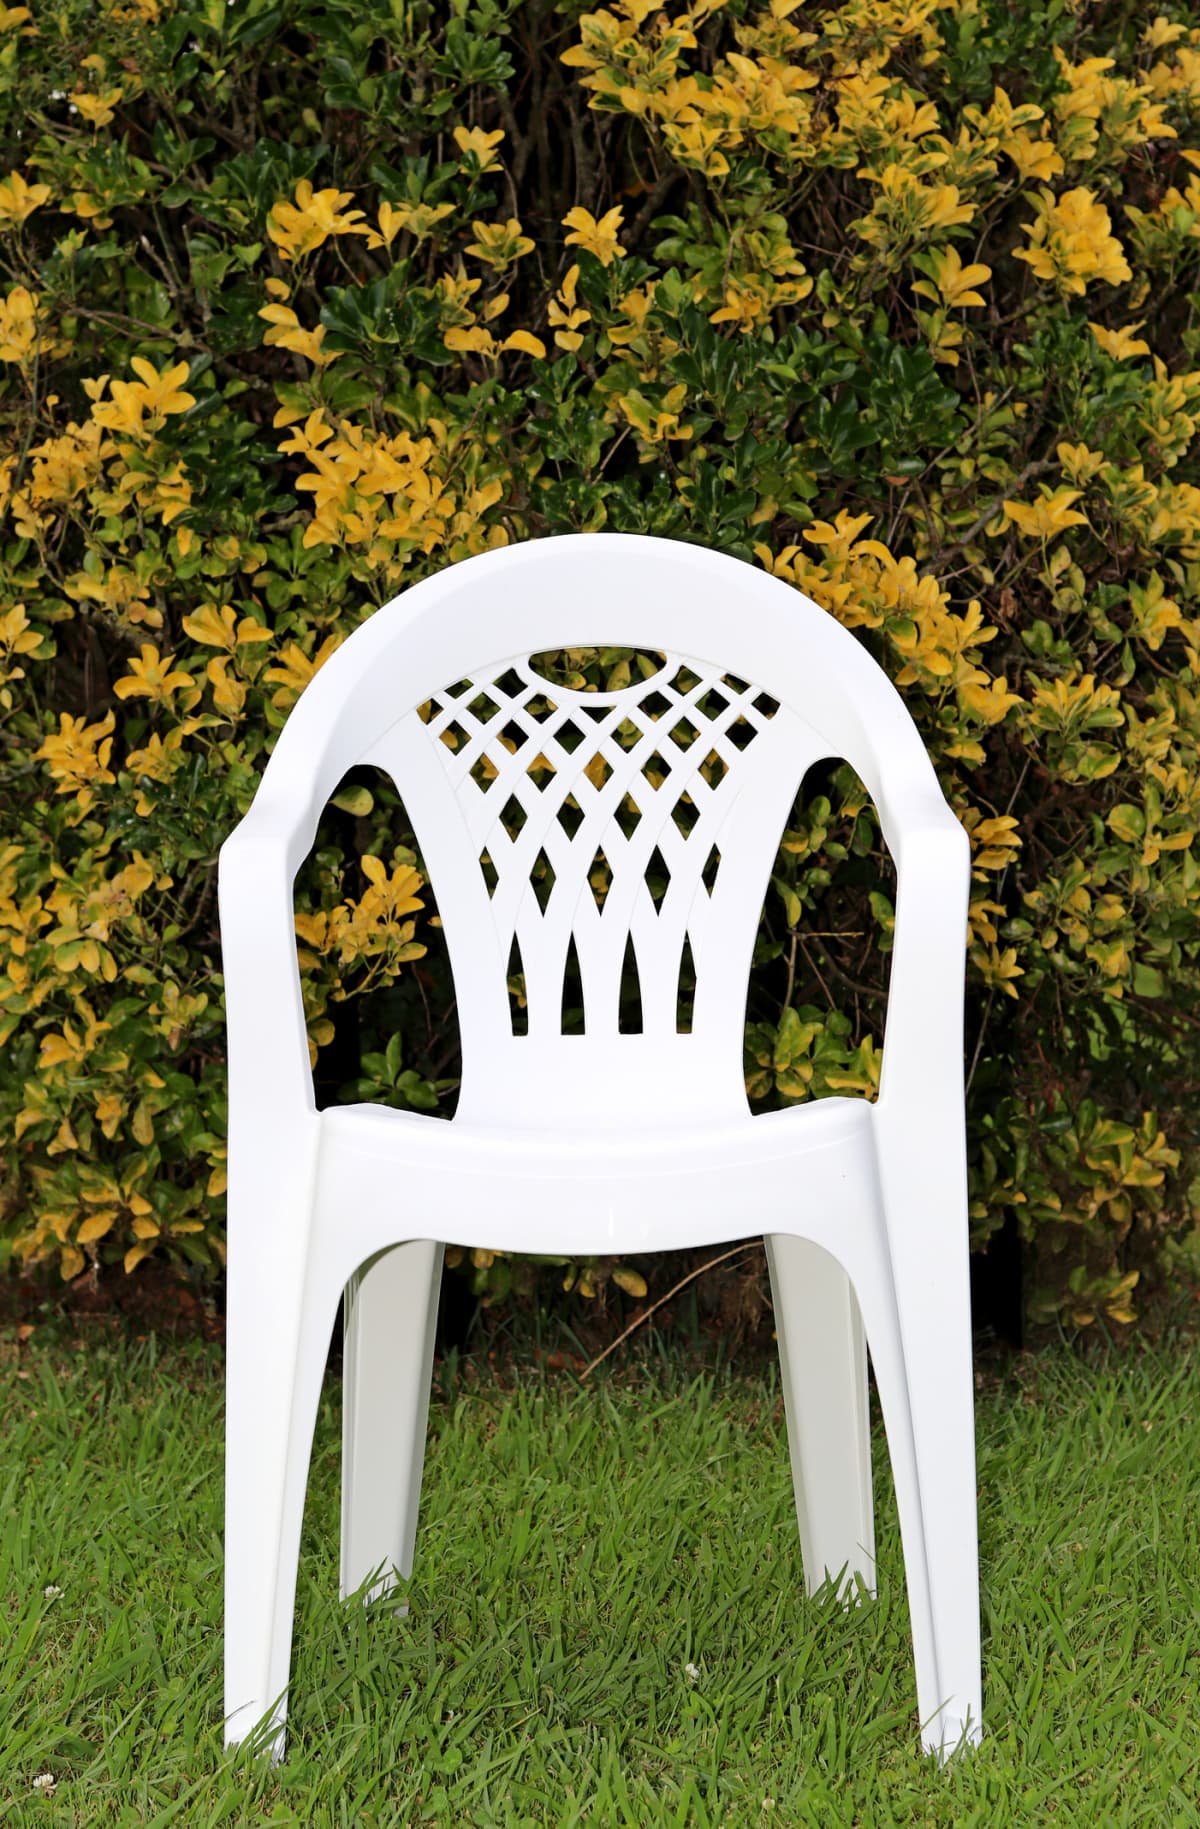 A white plastic chair in a garden